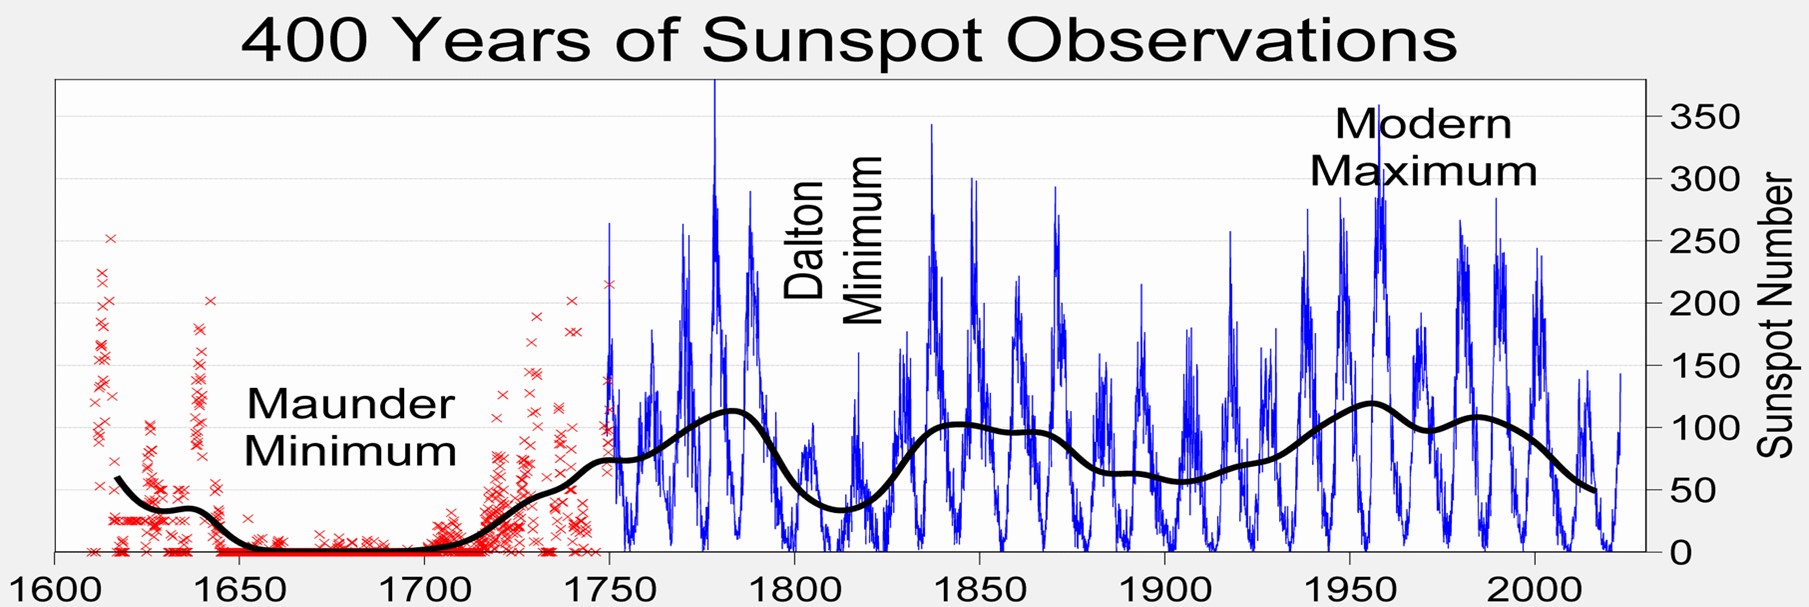 Graph showing 400 years of sunspot observations